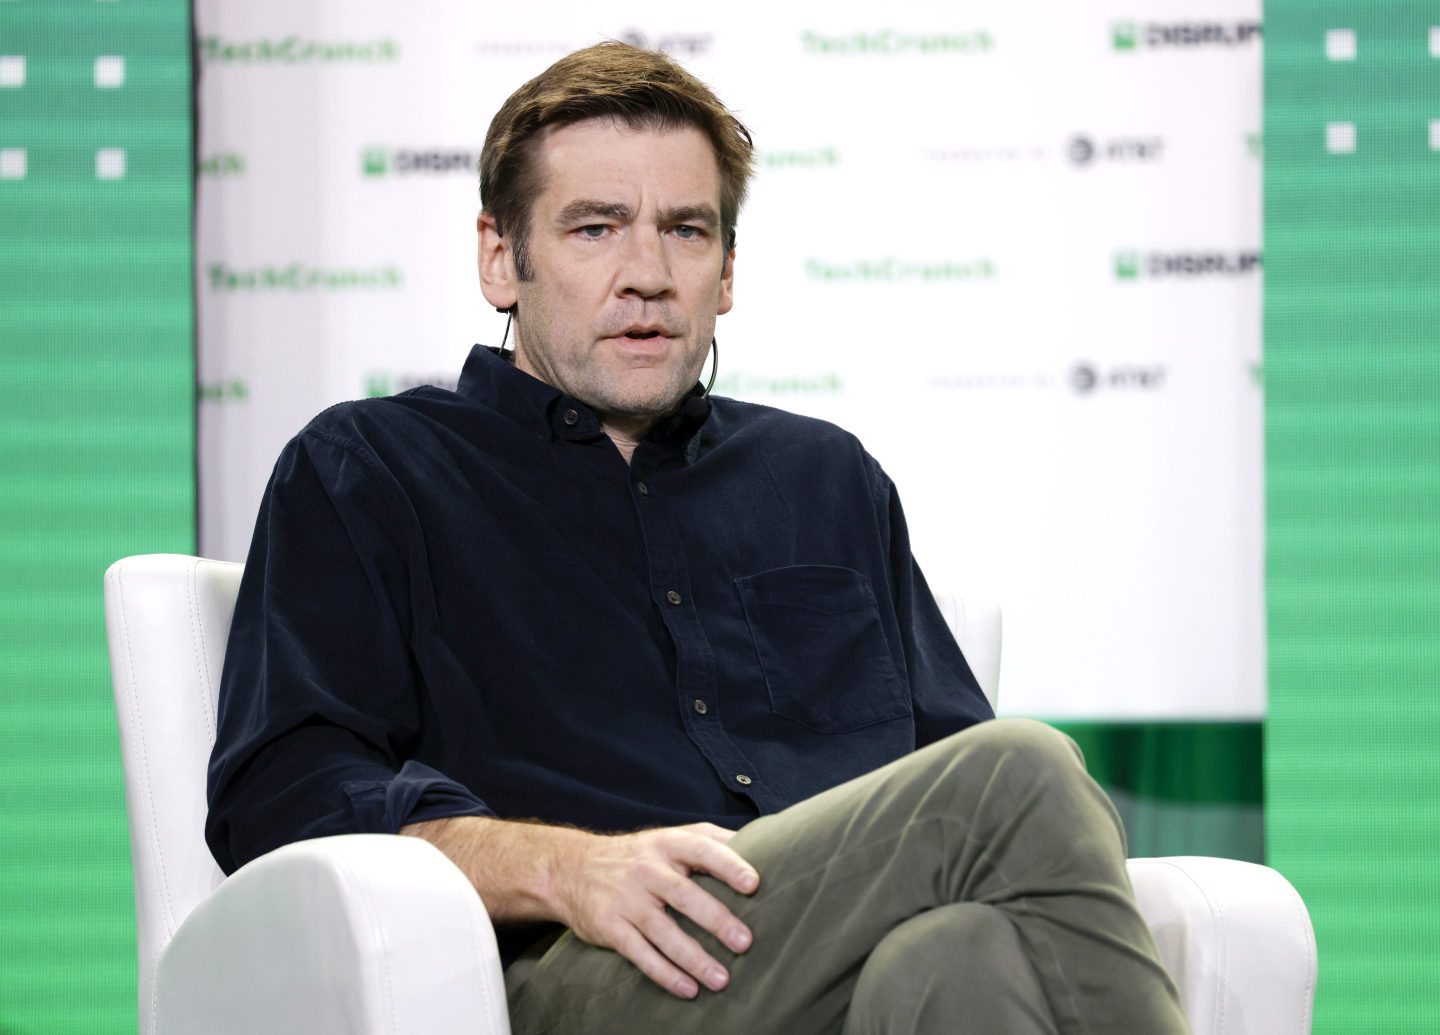 Chris Dixon is the founder and managing partner of a16z crypto.